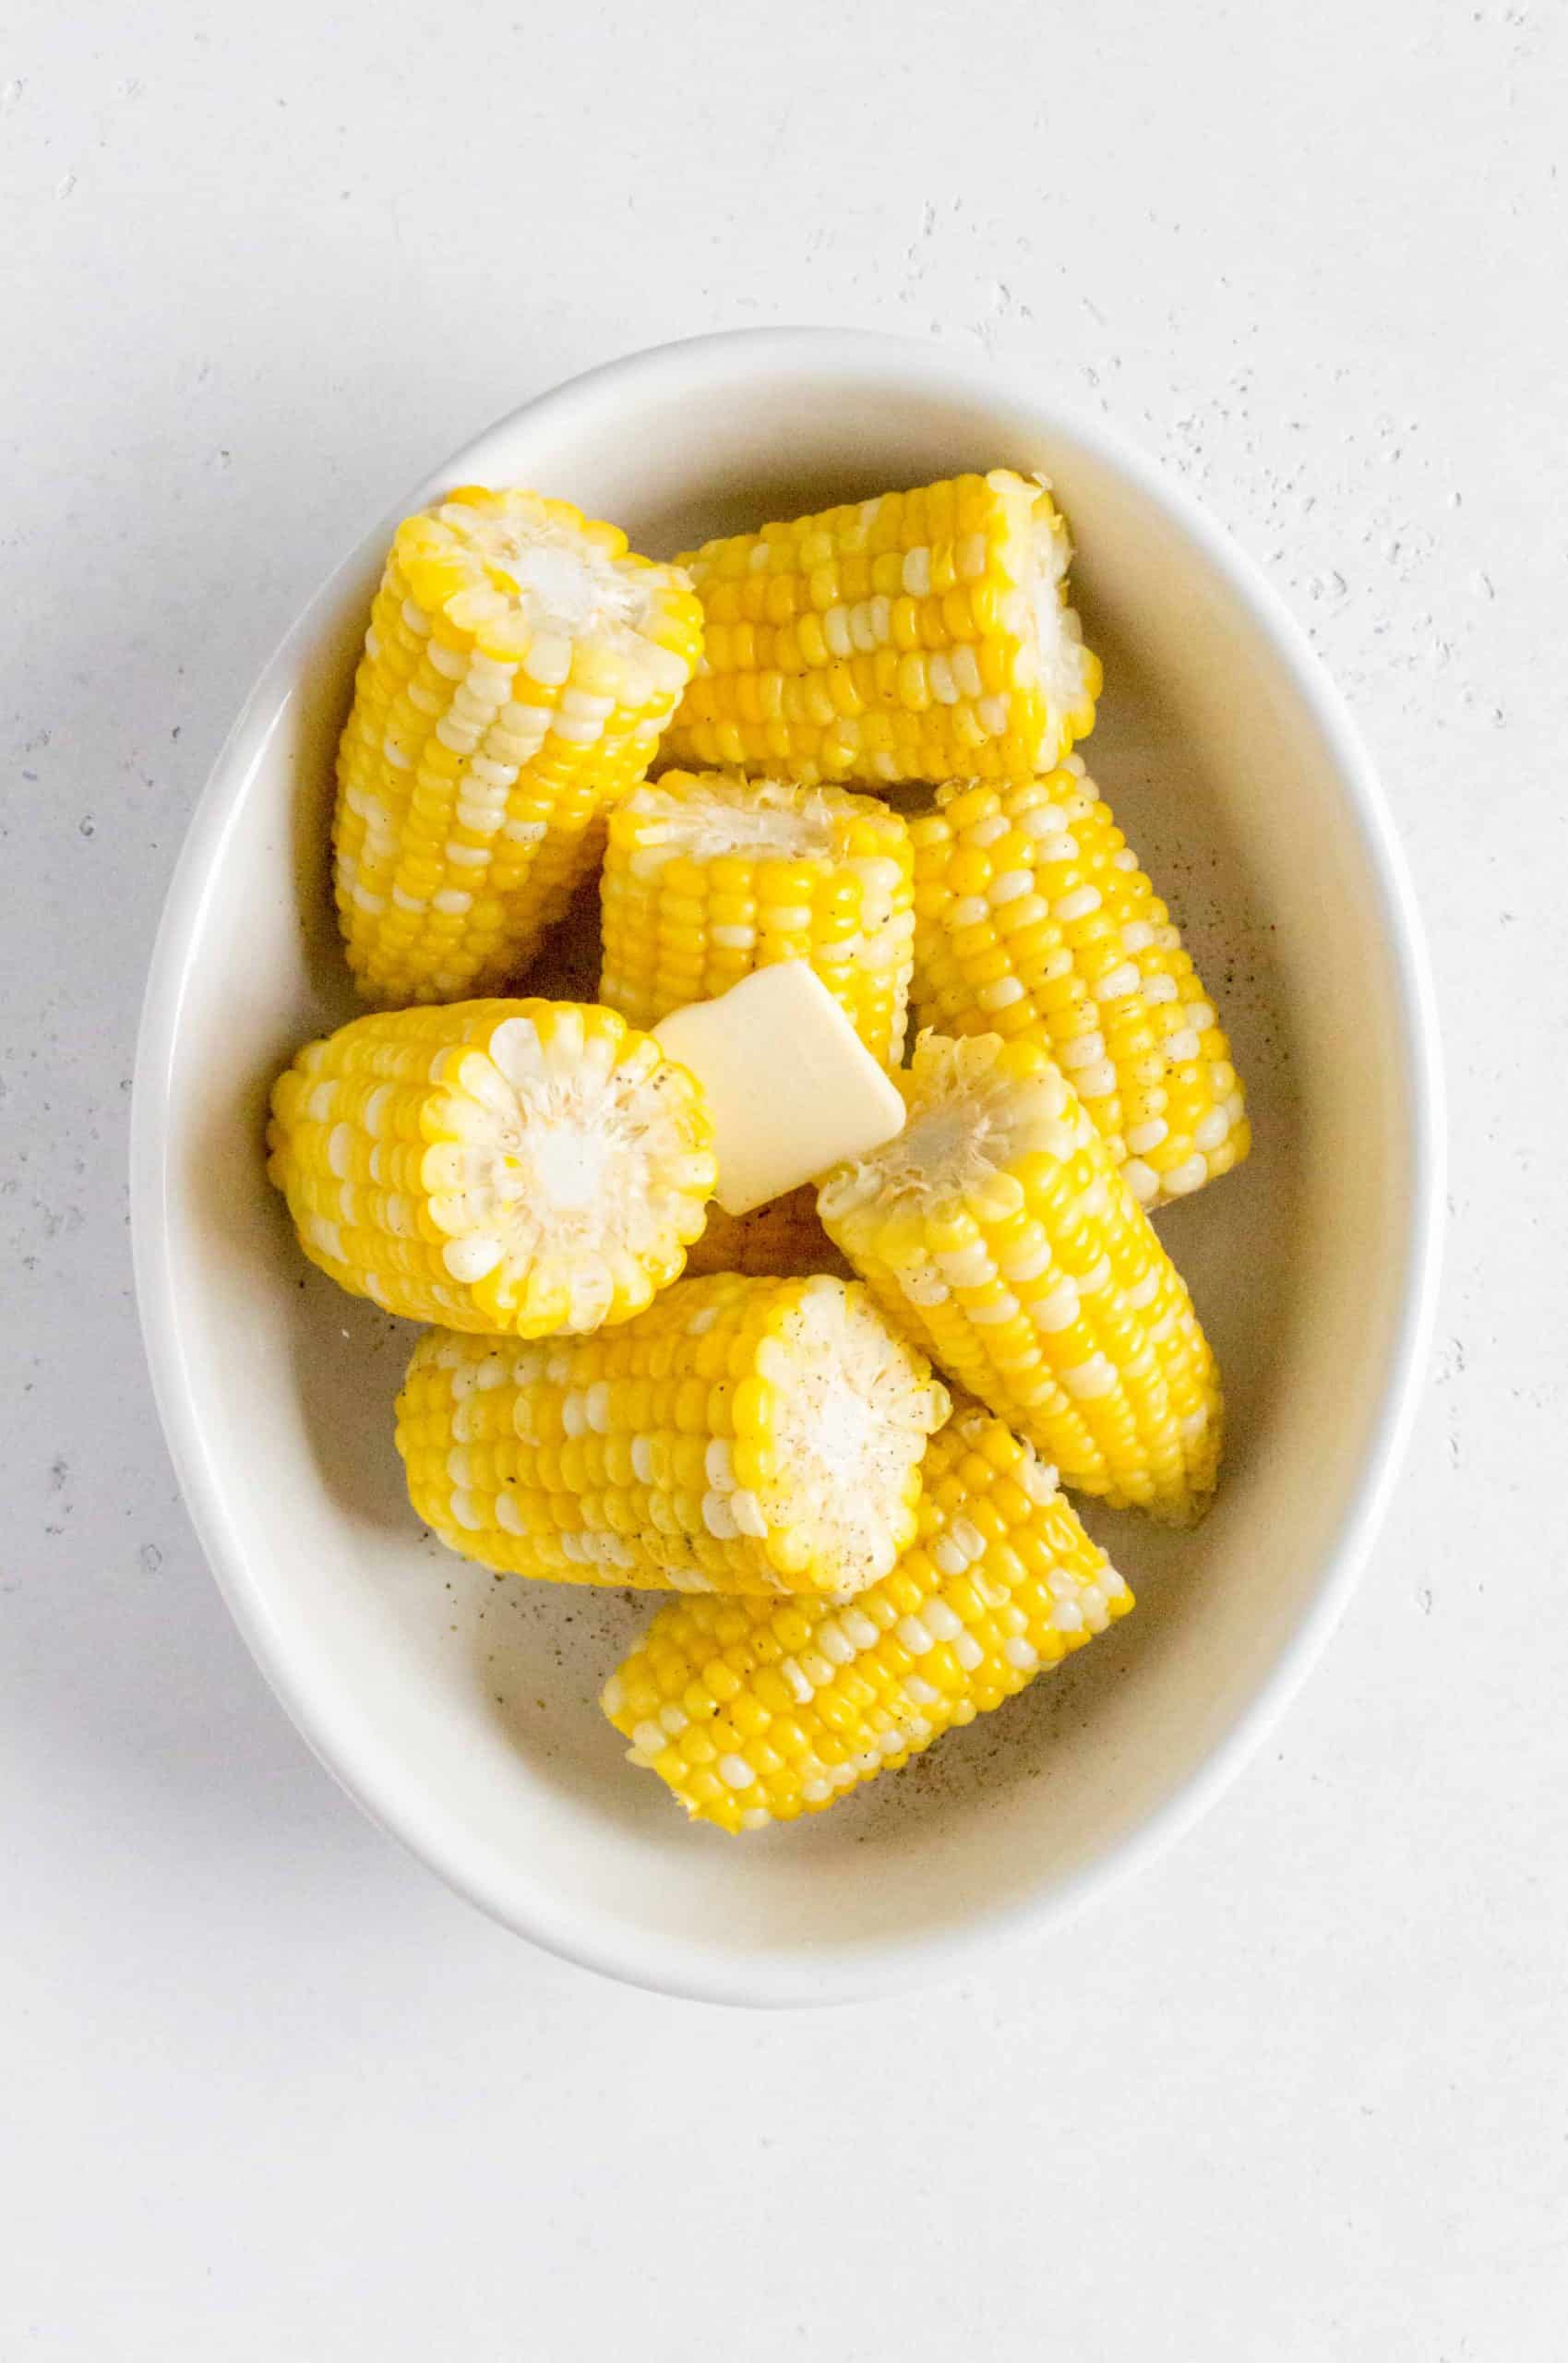 I love to keep it simple by adding some freshly cracked black pepper and butter onto the corn.